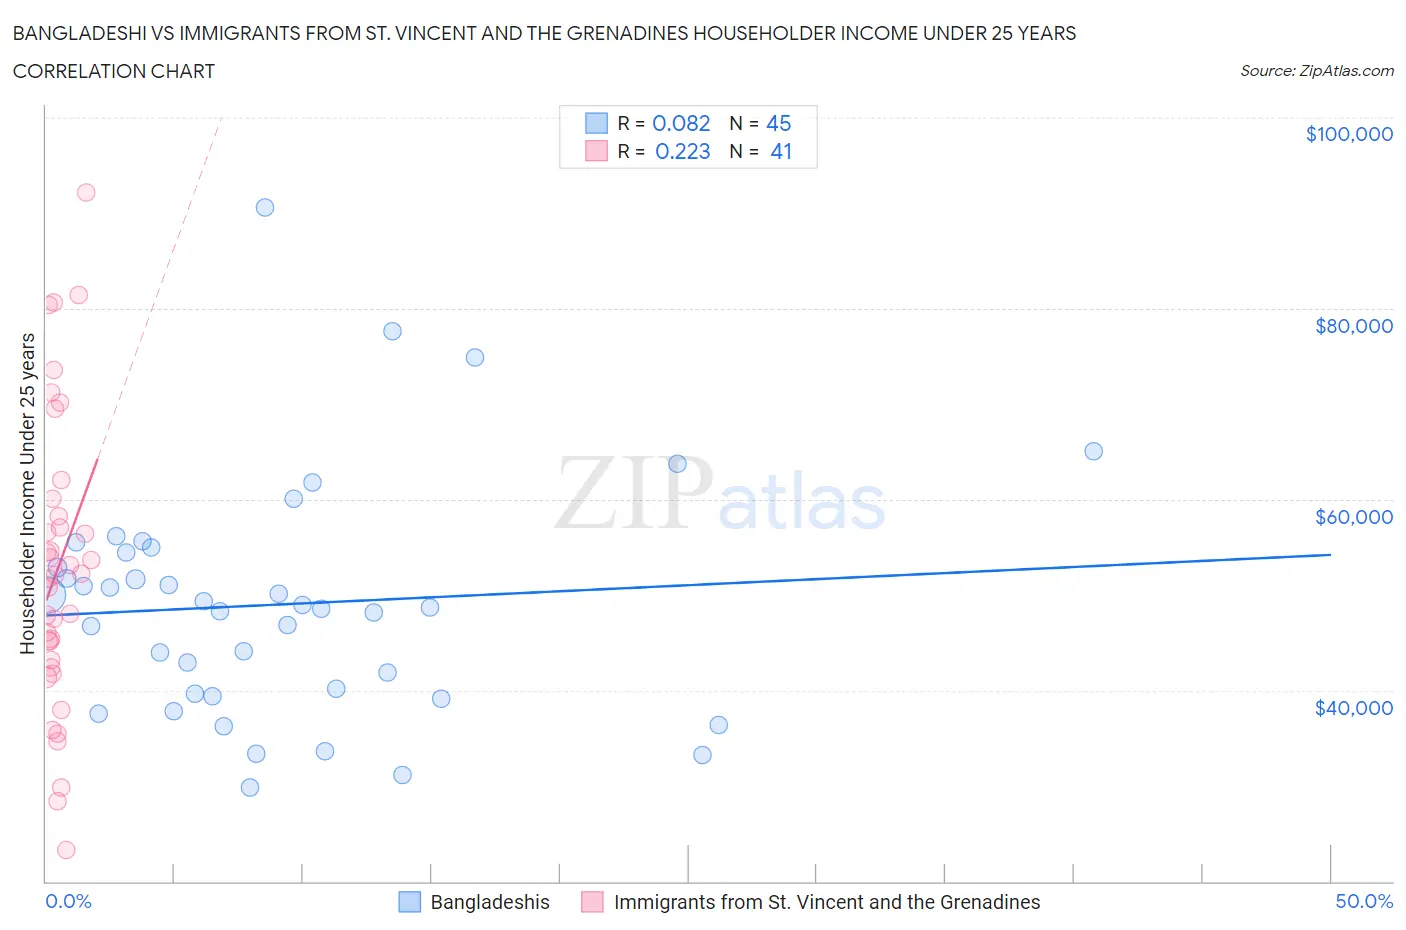 Bangladeshi vs Immigrants from St. Vincent and the Grenadines Householder Income Under 25 years